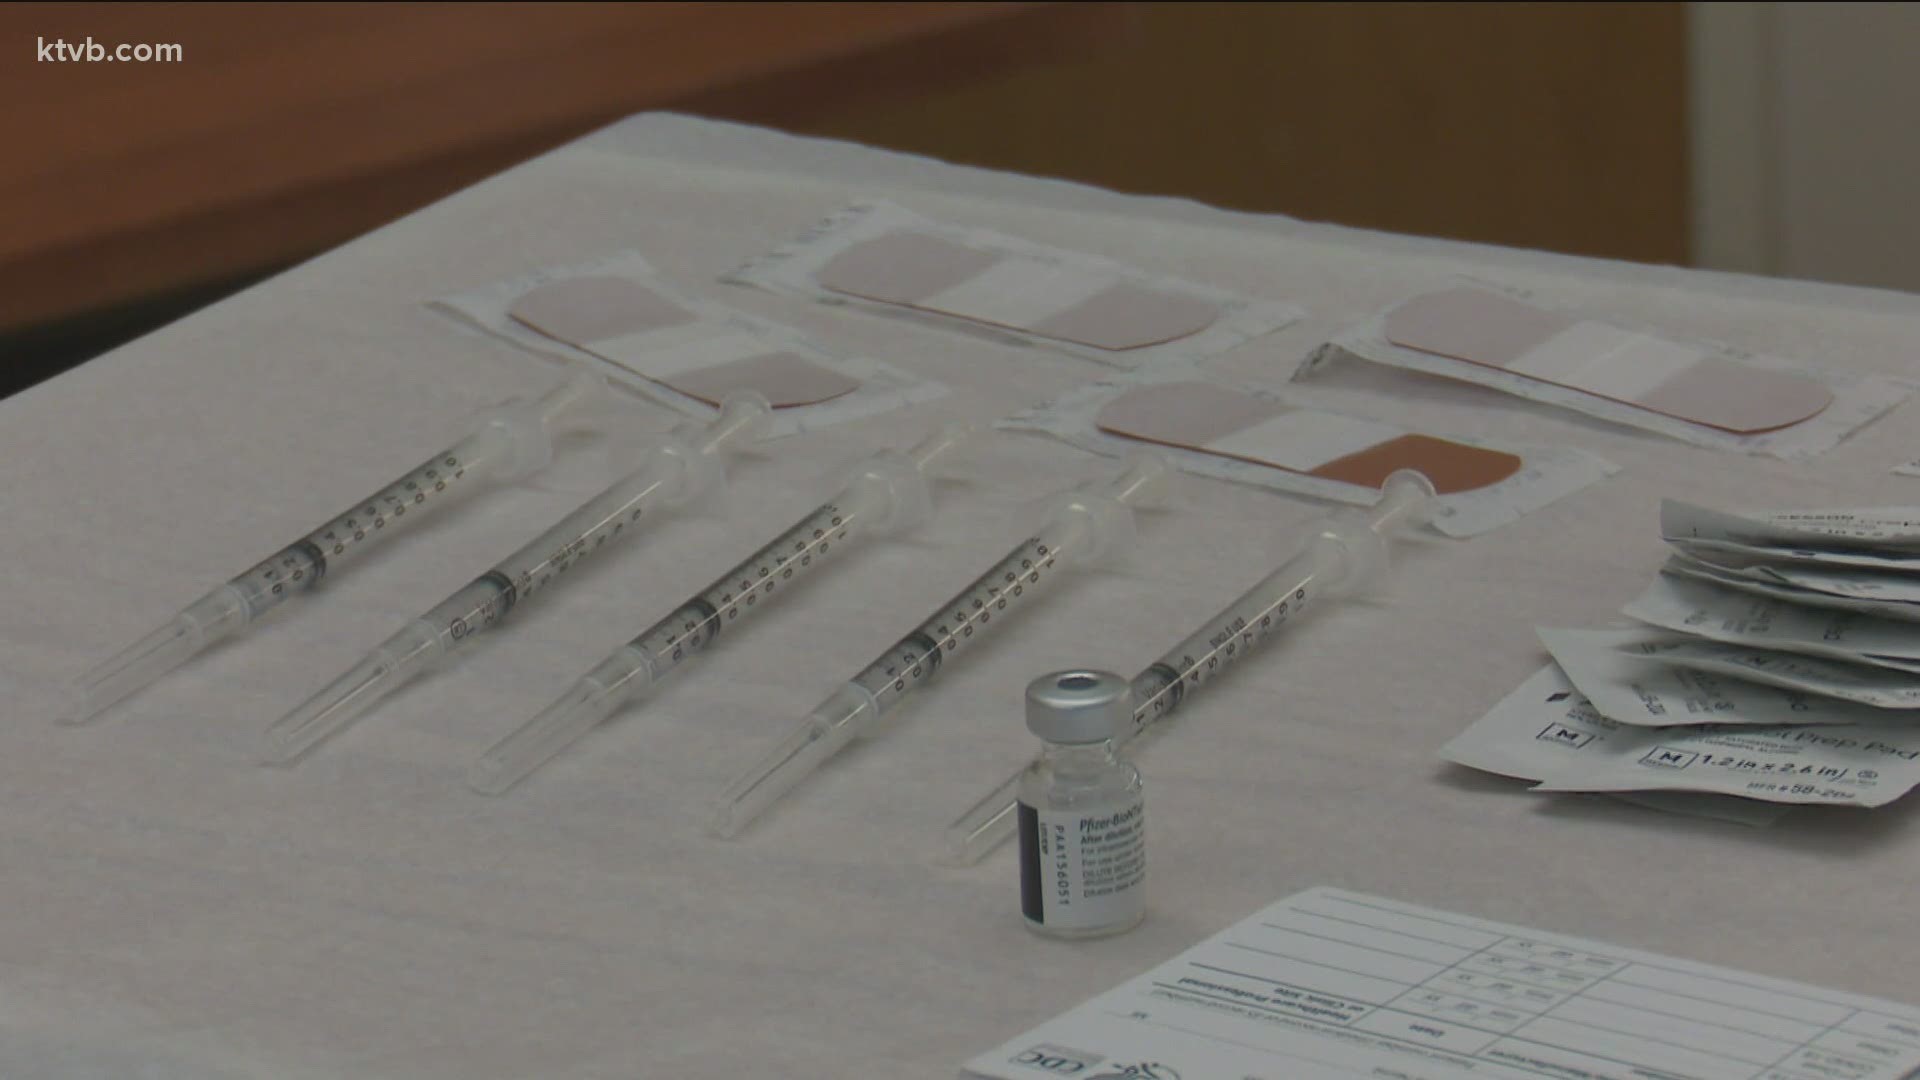 Every health district in Idaho is getting some of the vaccine. We learned more about their plans for distribution.